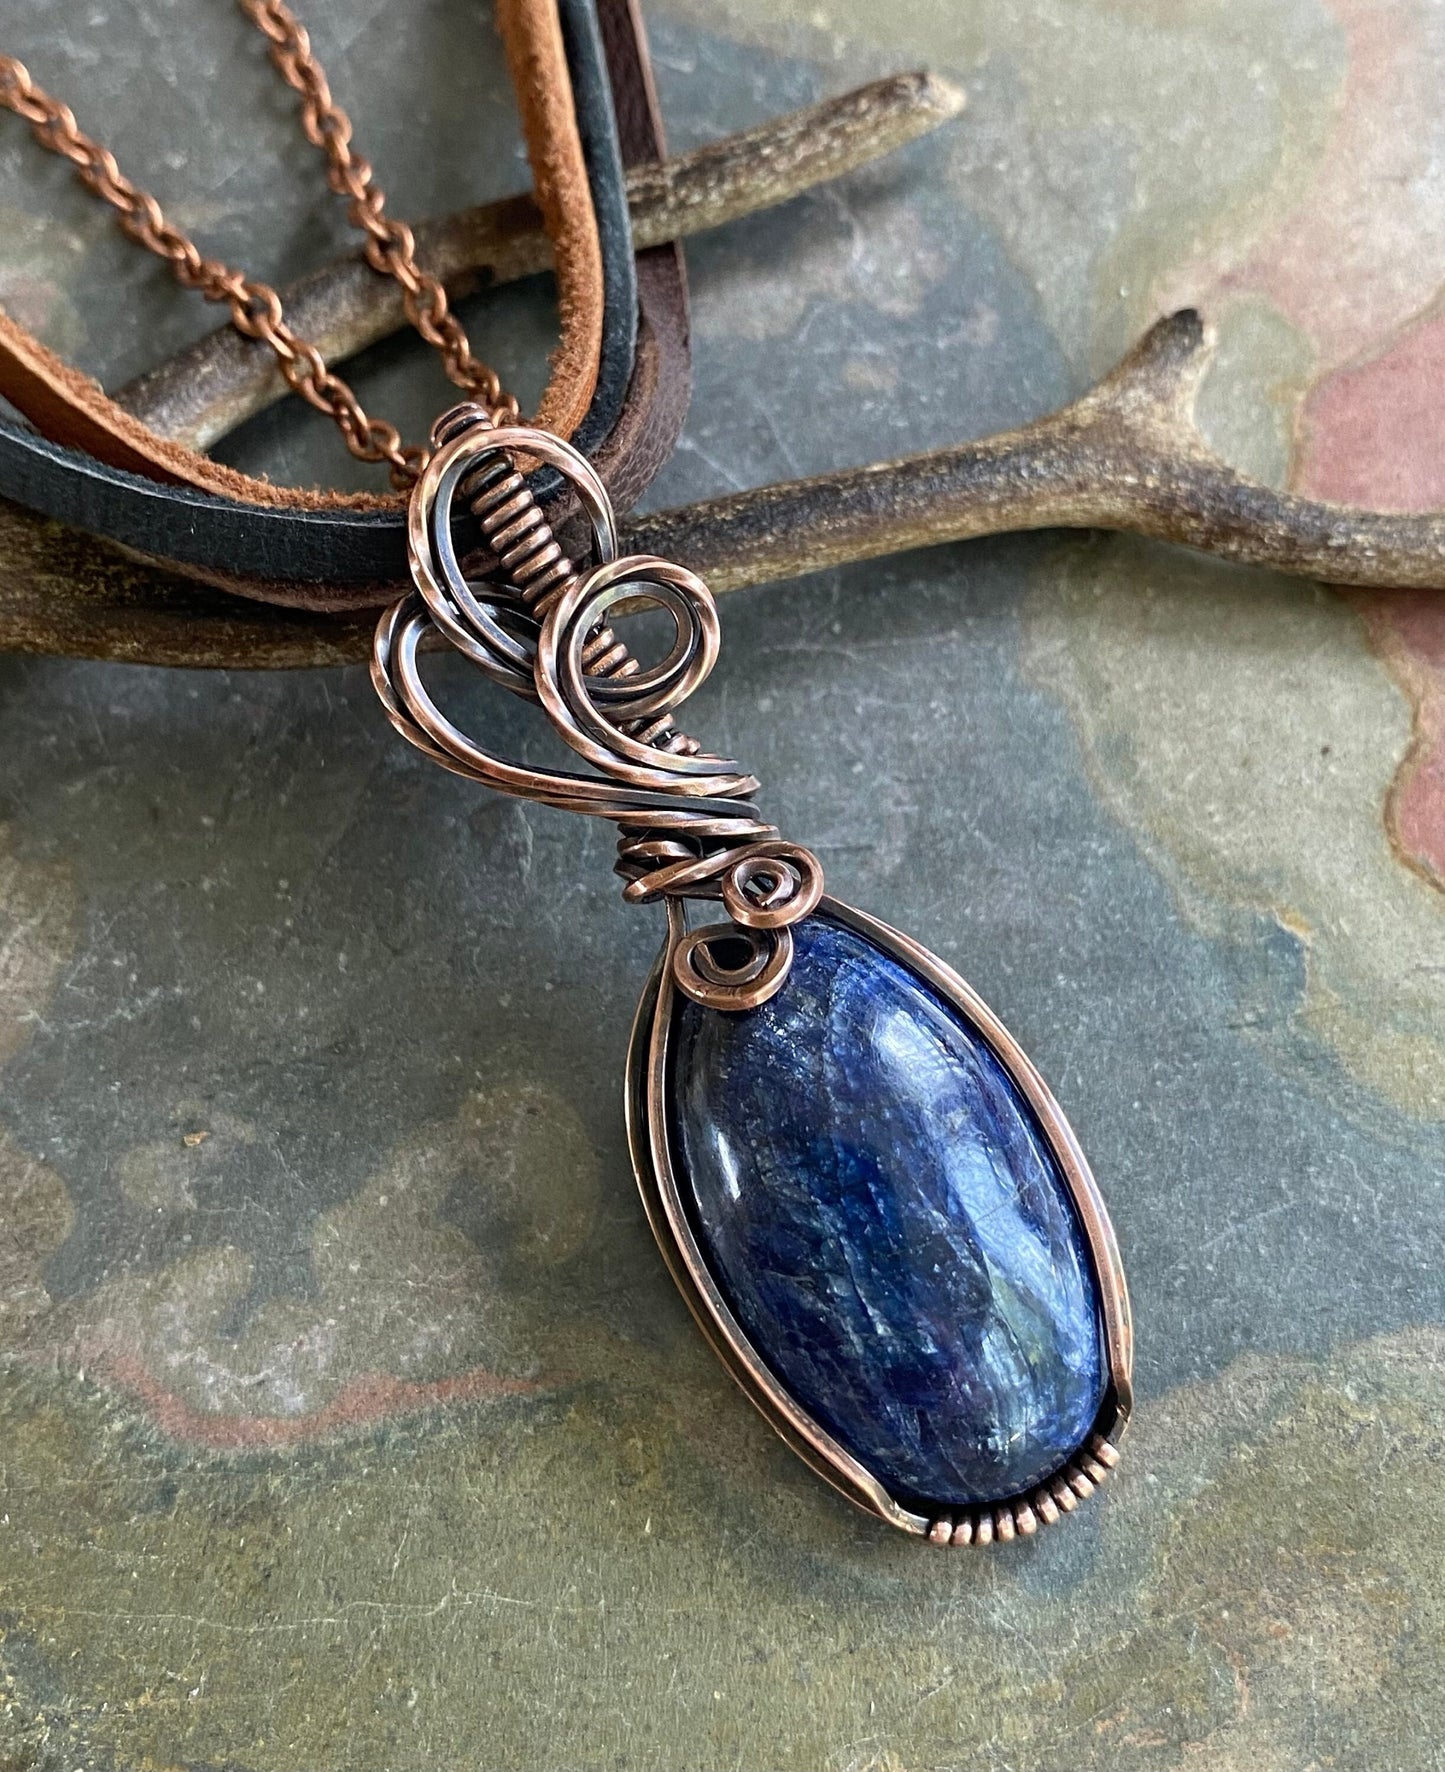 Kyanite Necklace, Wire Wrapped kyanite Necklace in Copper, Kyanite Healing Necklace, Kyanite in Copper Wire, Raw kyanite Pendant Necklace